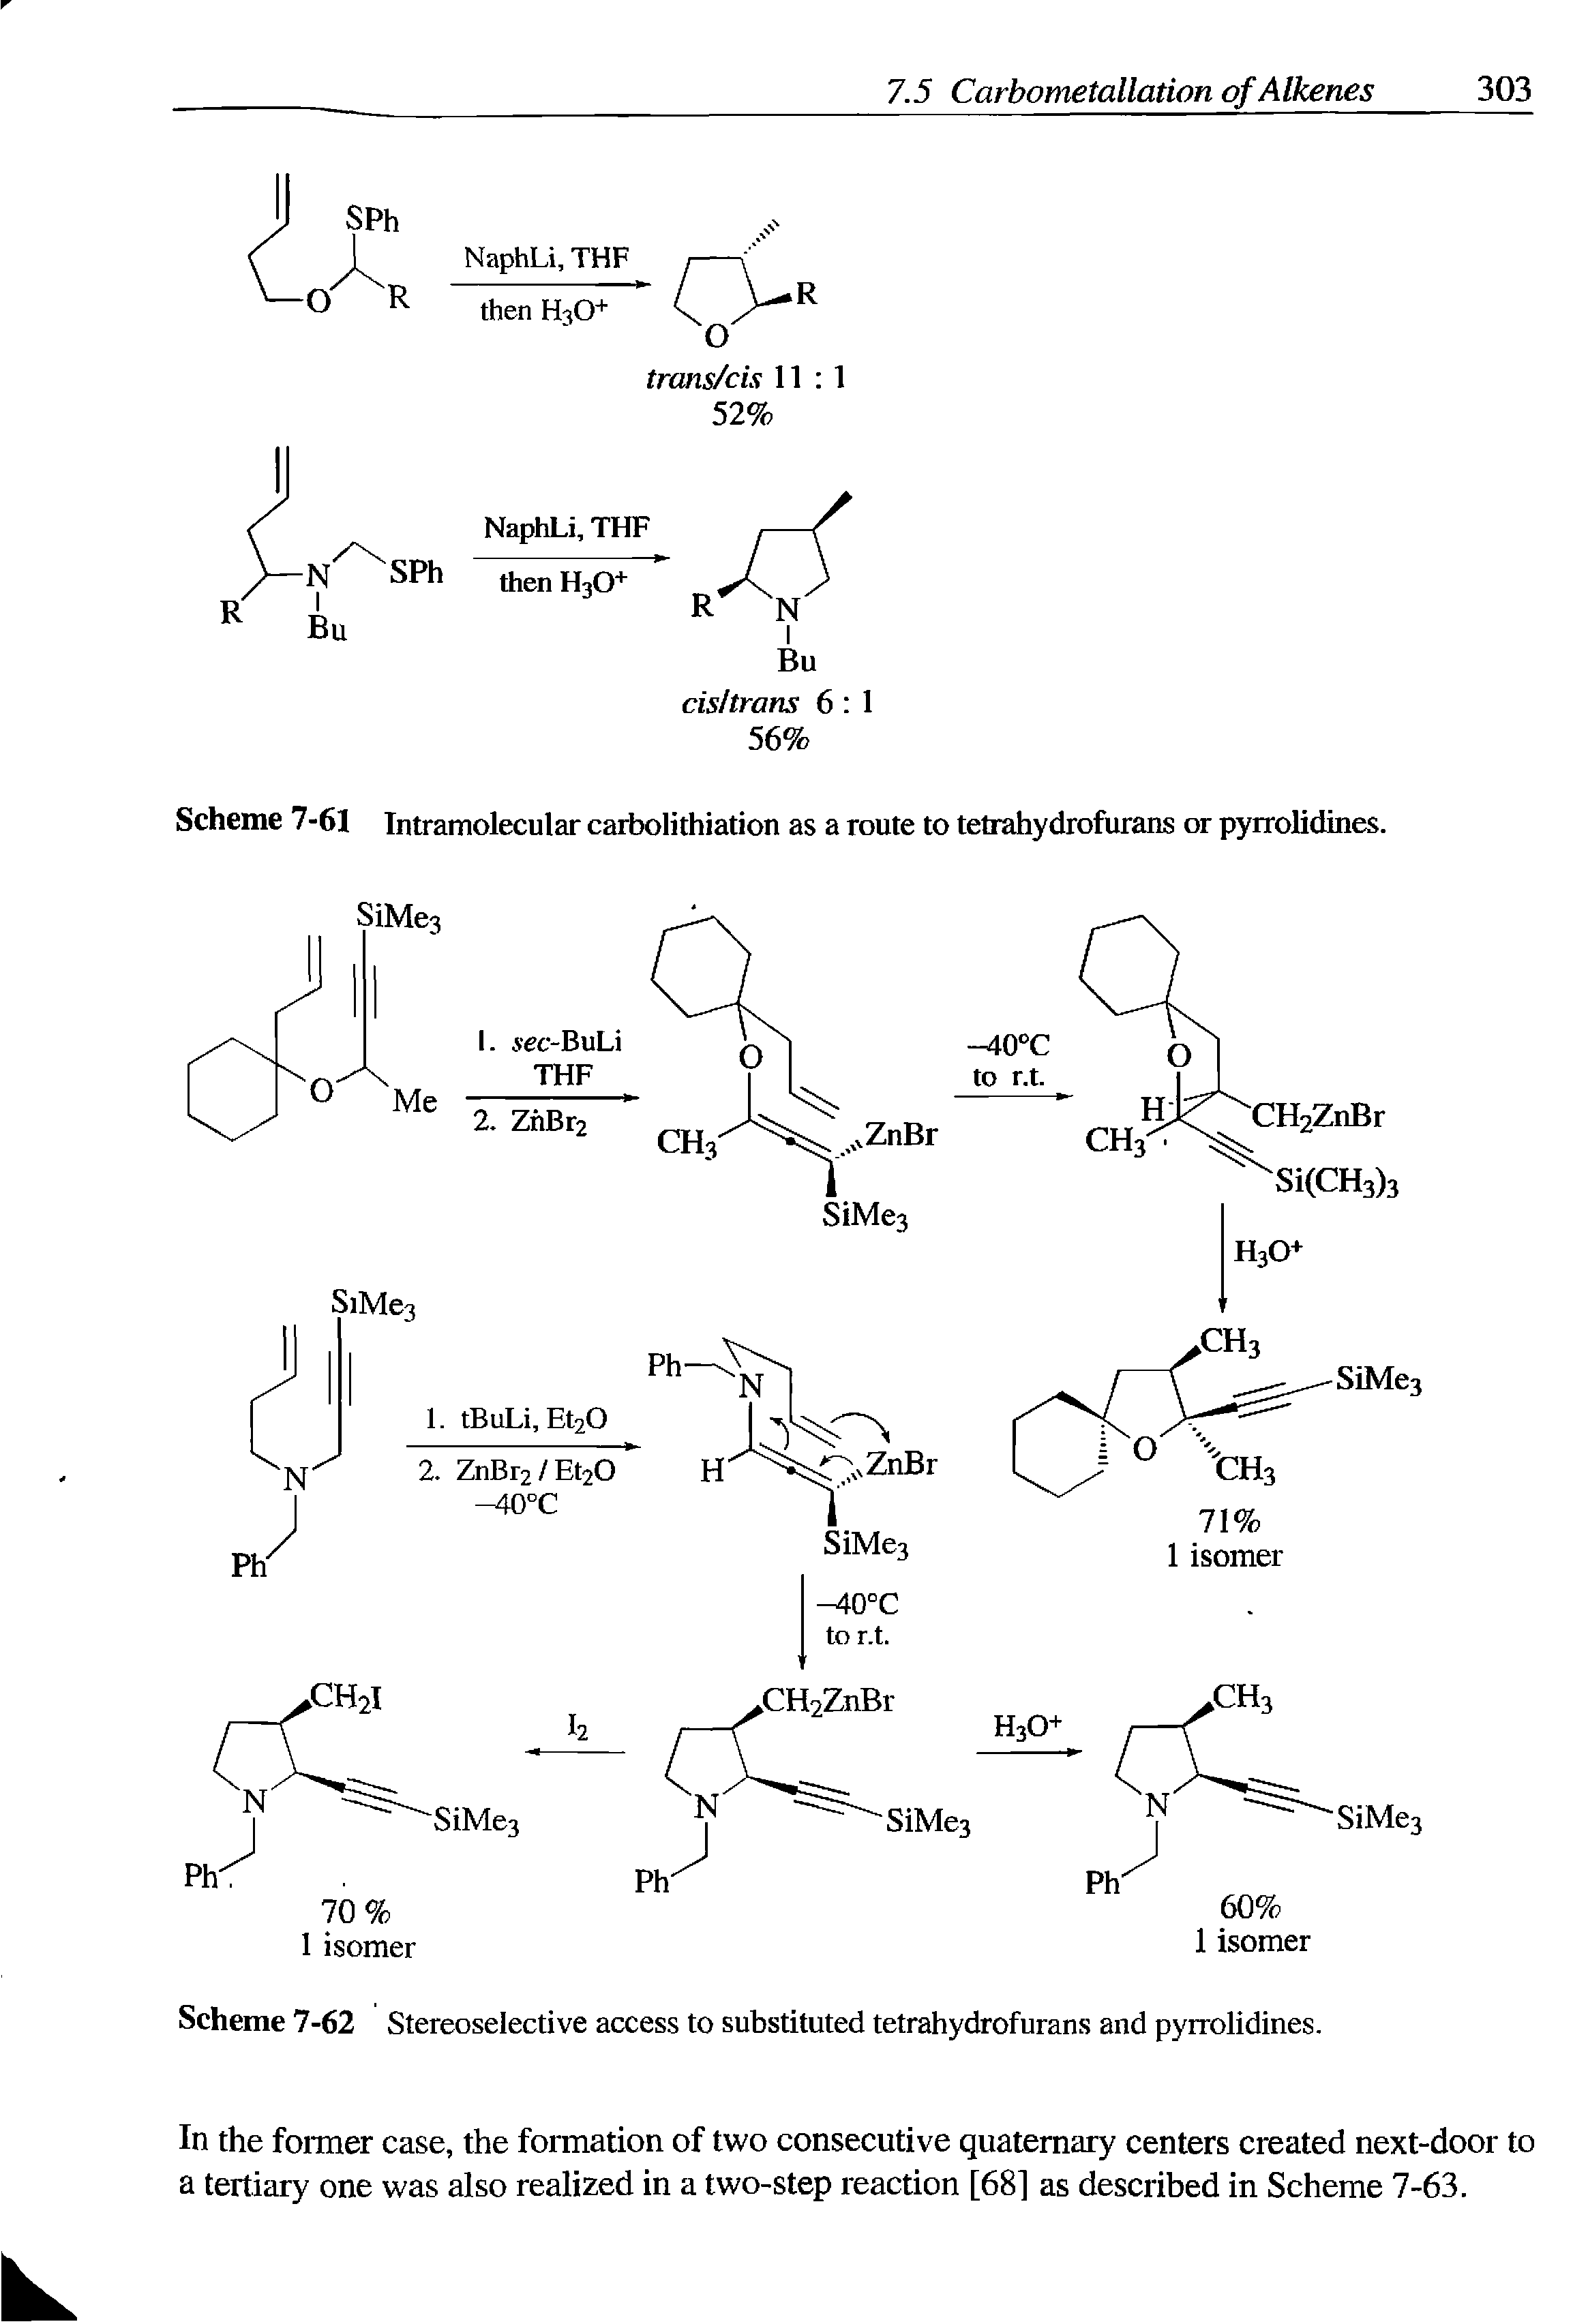 Scheme 7-62 Stereoselective access to substituted tetrahydrofurans and pyrrolidines.